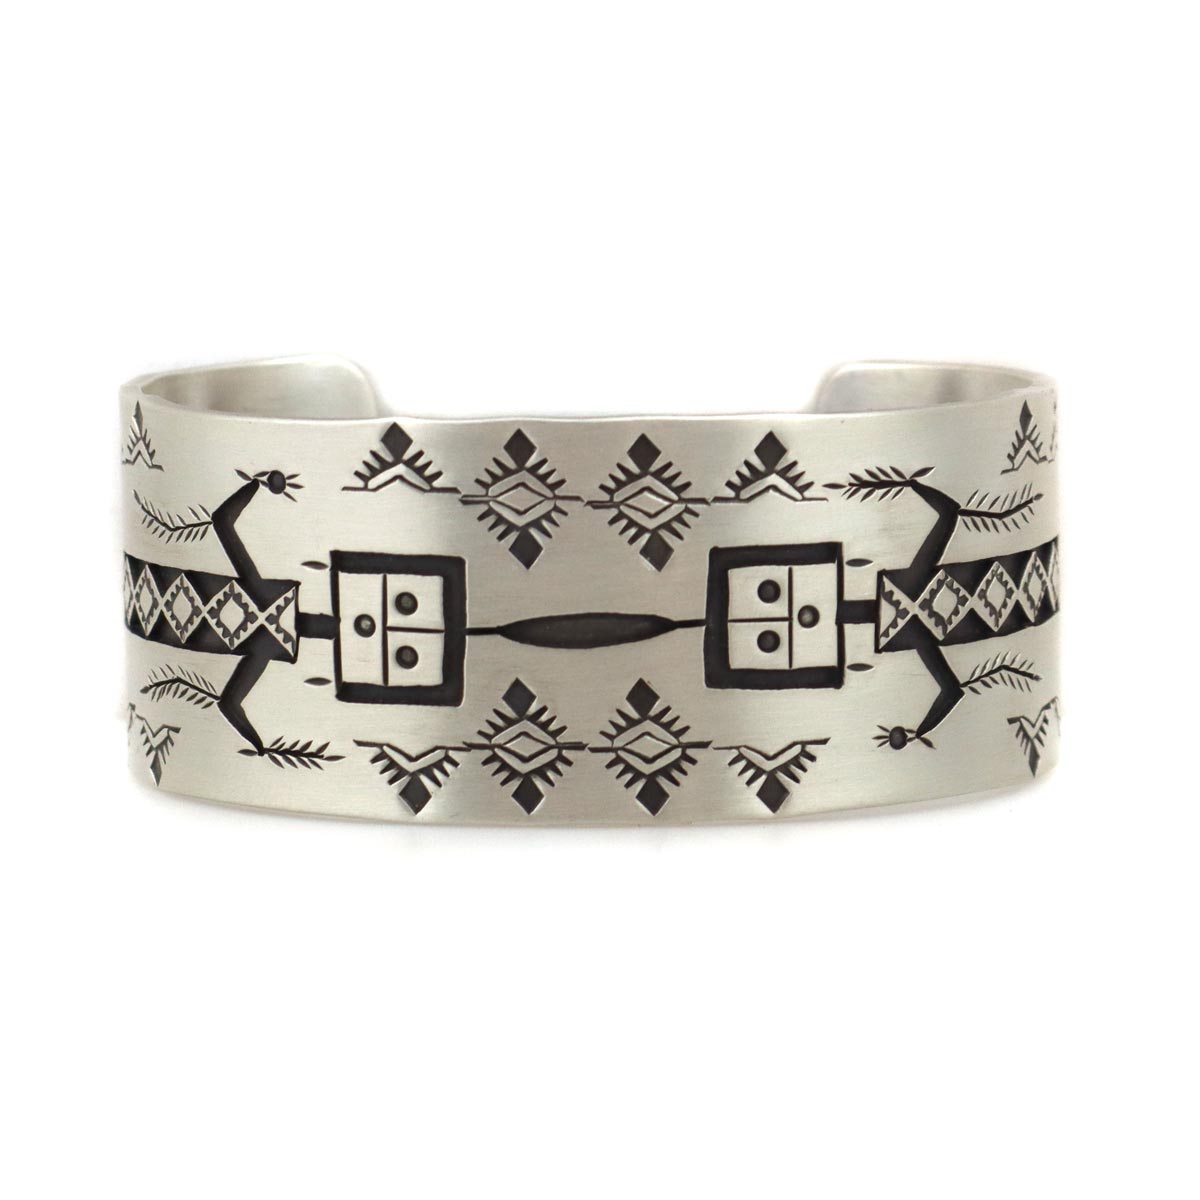 Roland Begay - Contemporary Navajo Sterling Silver Overlay Bracelet with Yei Design, size 7 (J14758)